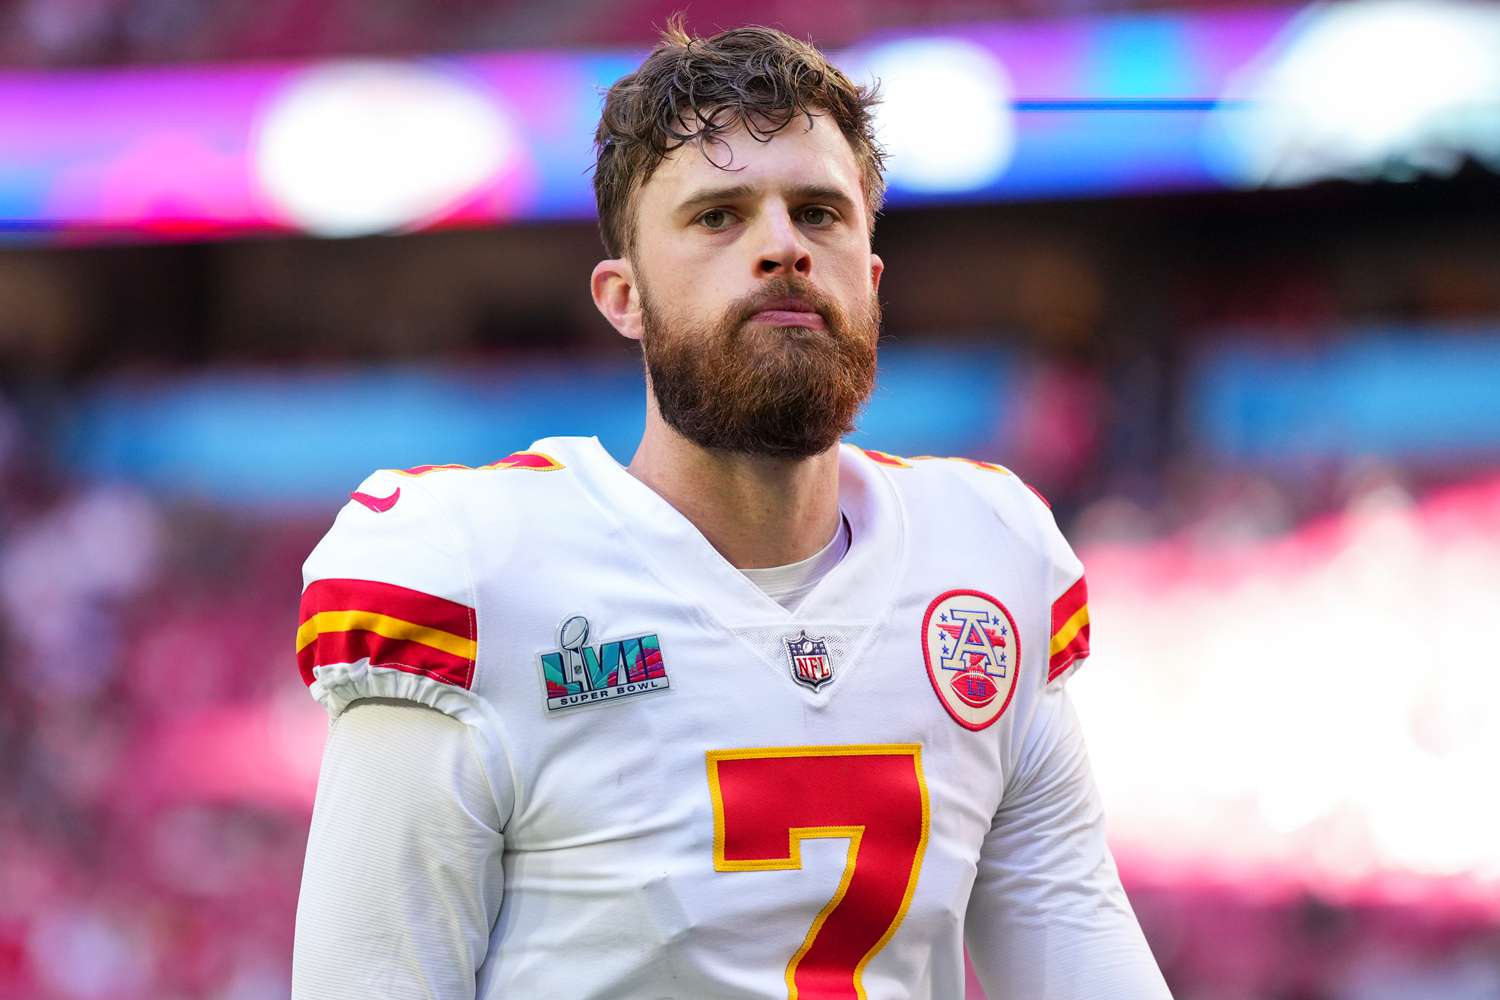 Chiefs’ Harrison Butker Criticized for Graduation Speech Attacking Working Women While Quoting Taylor Swift [Video]